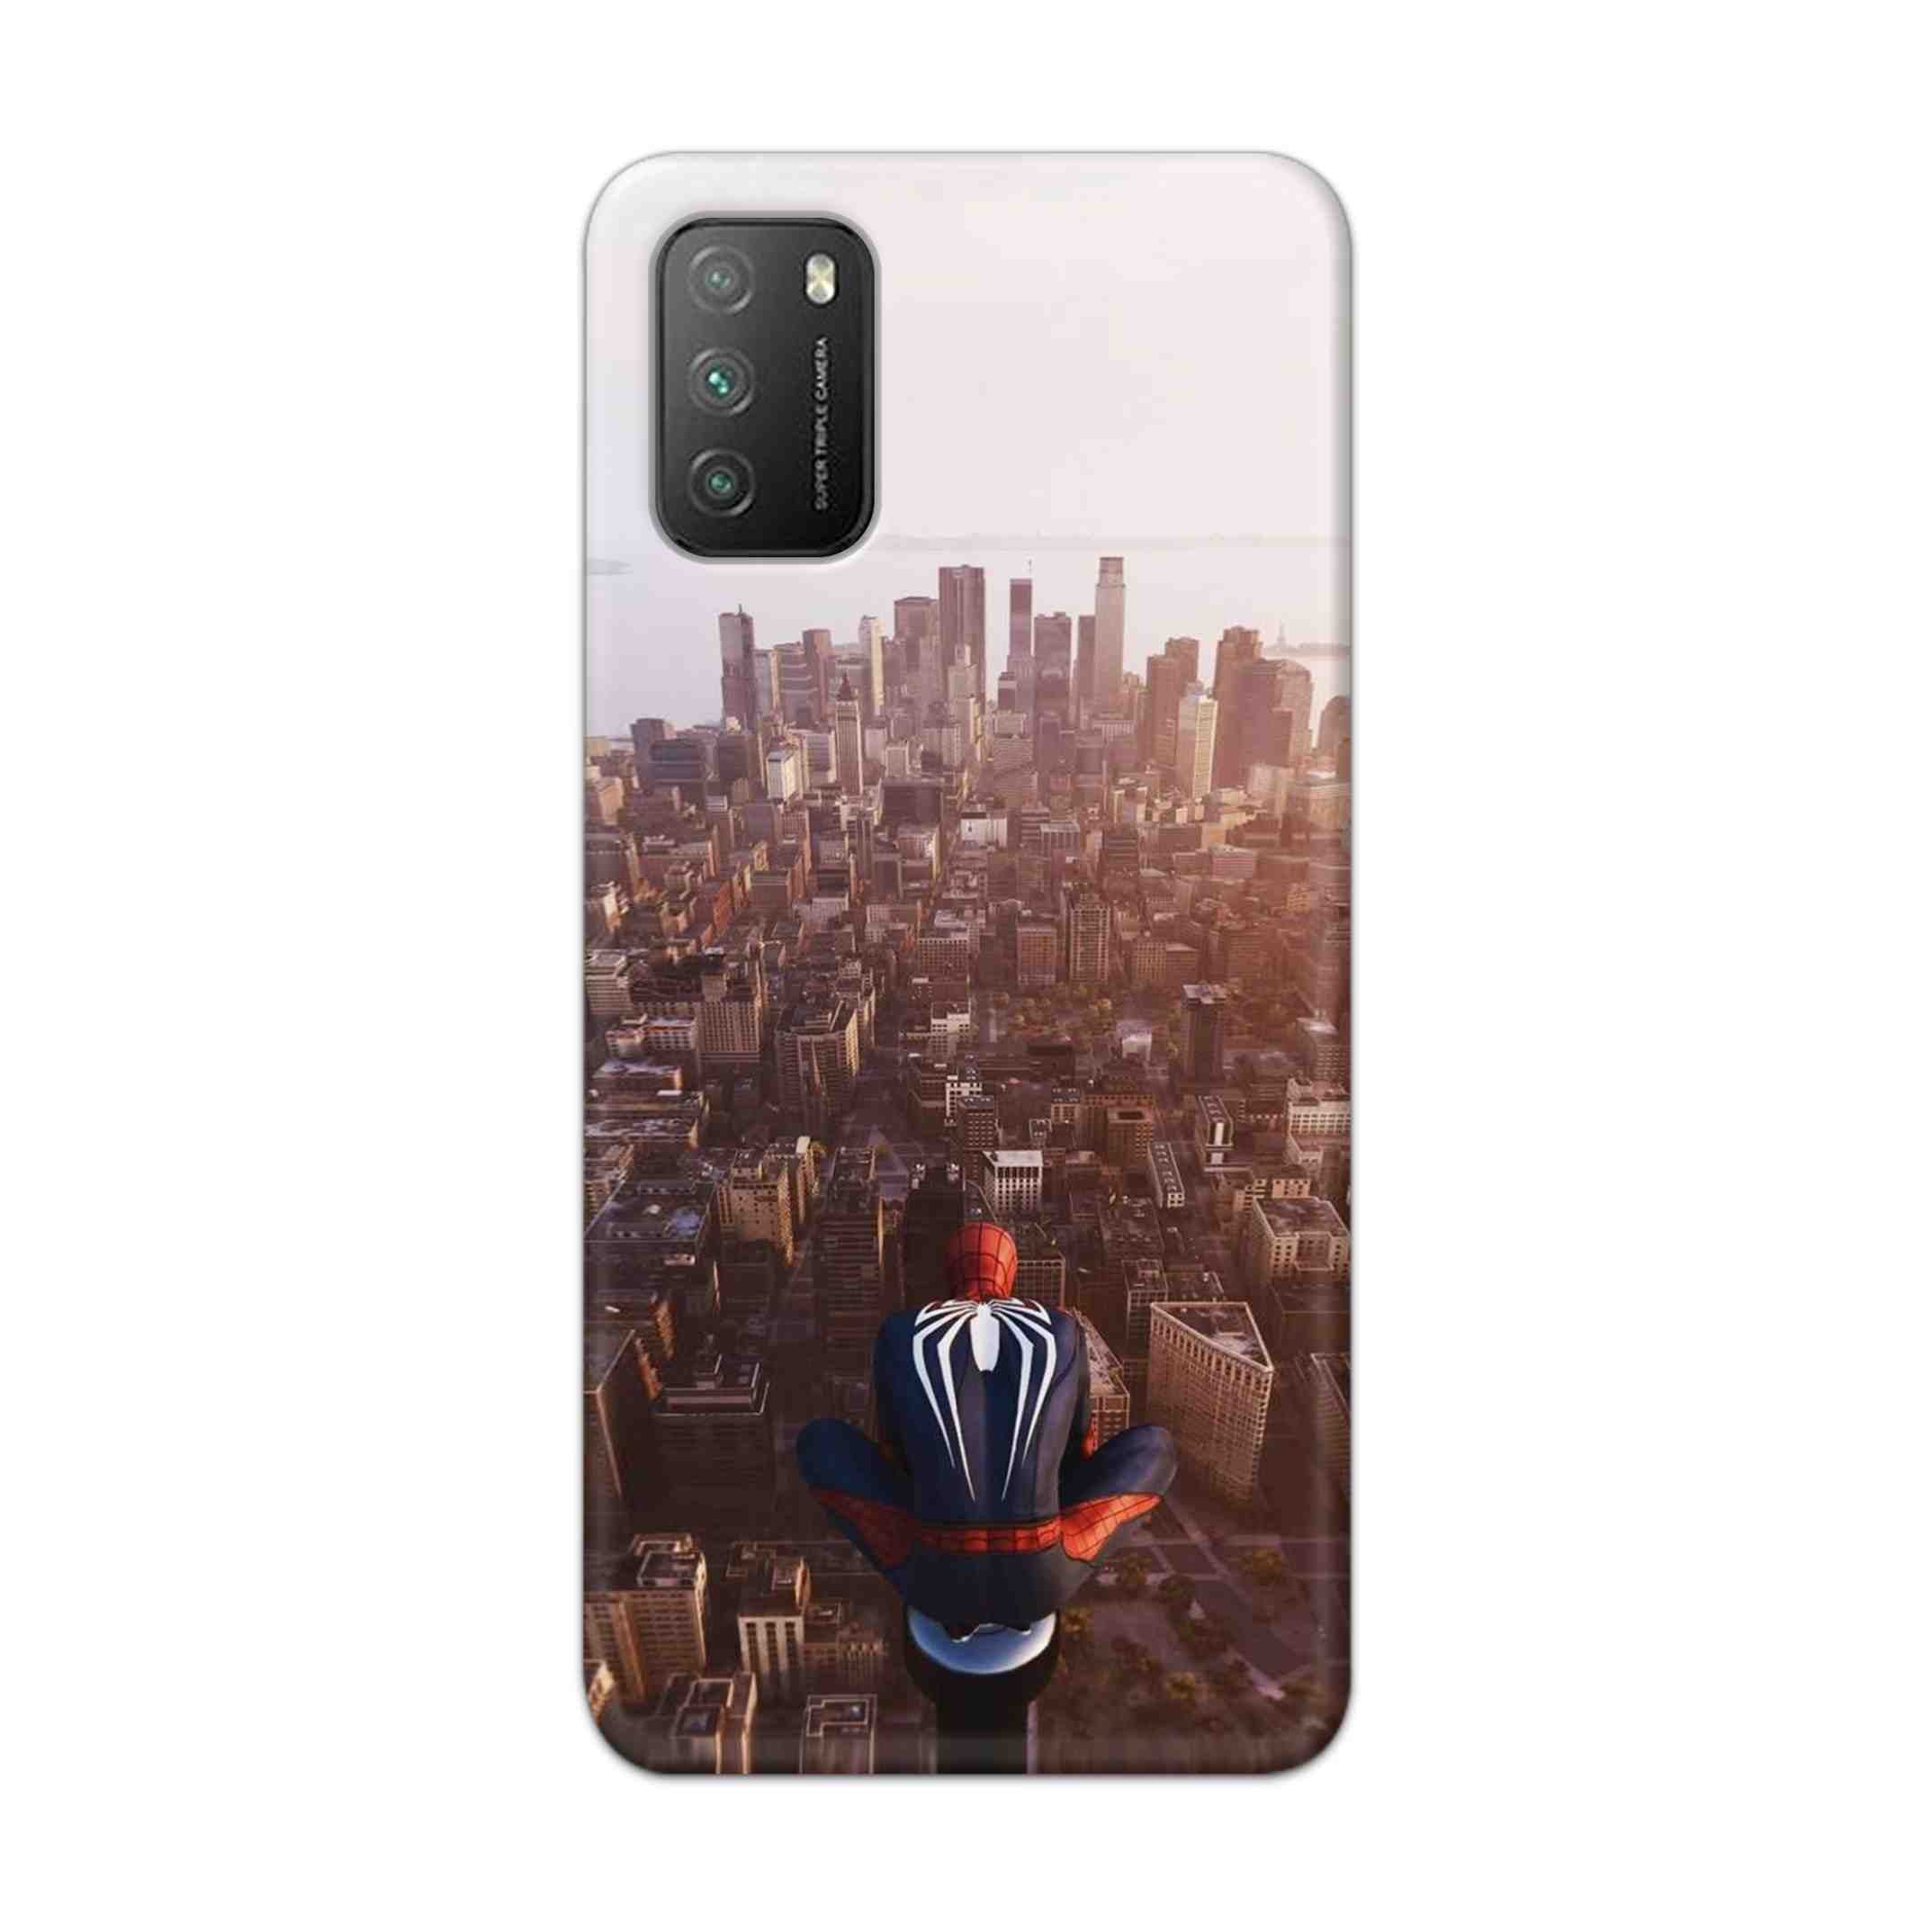 Buy City Of Spiderman Hard Back Mobile Phone Case Cover For Poco M3 Online